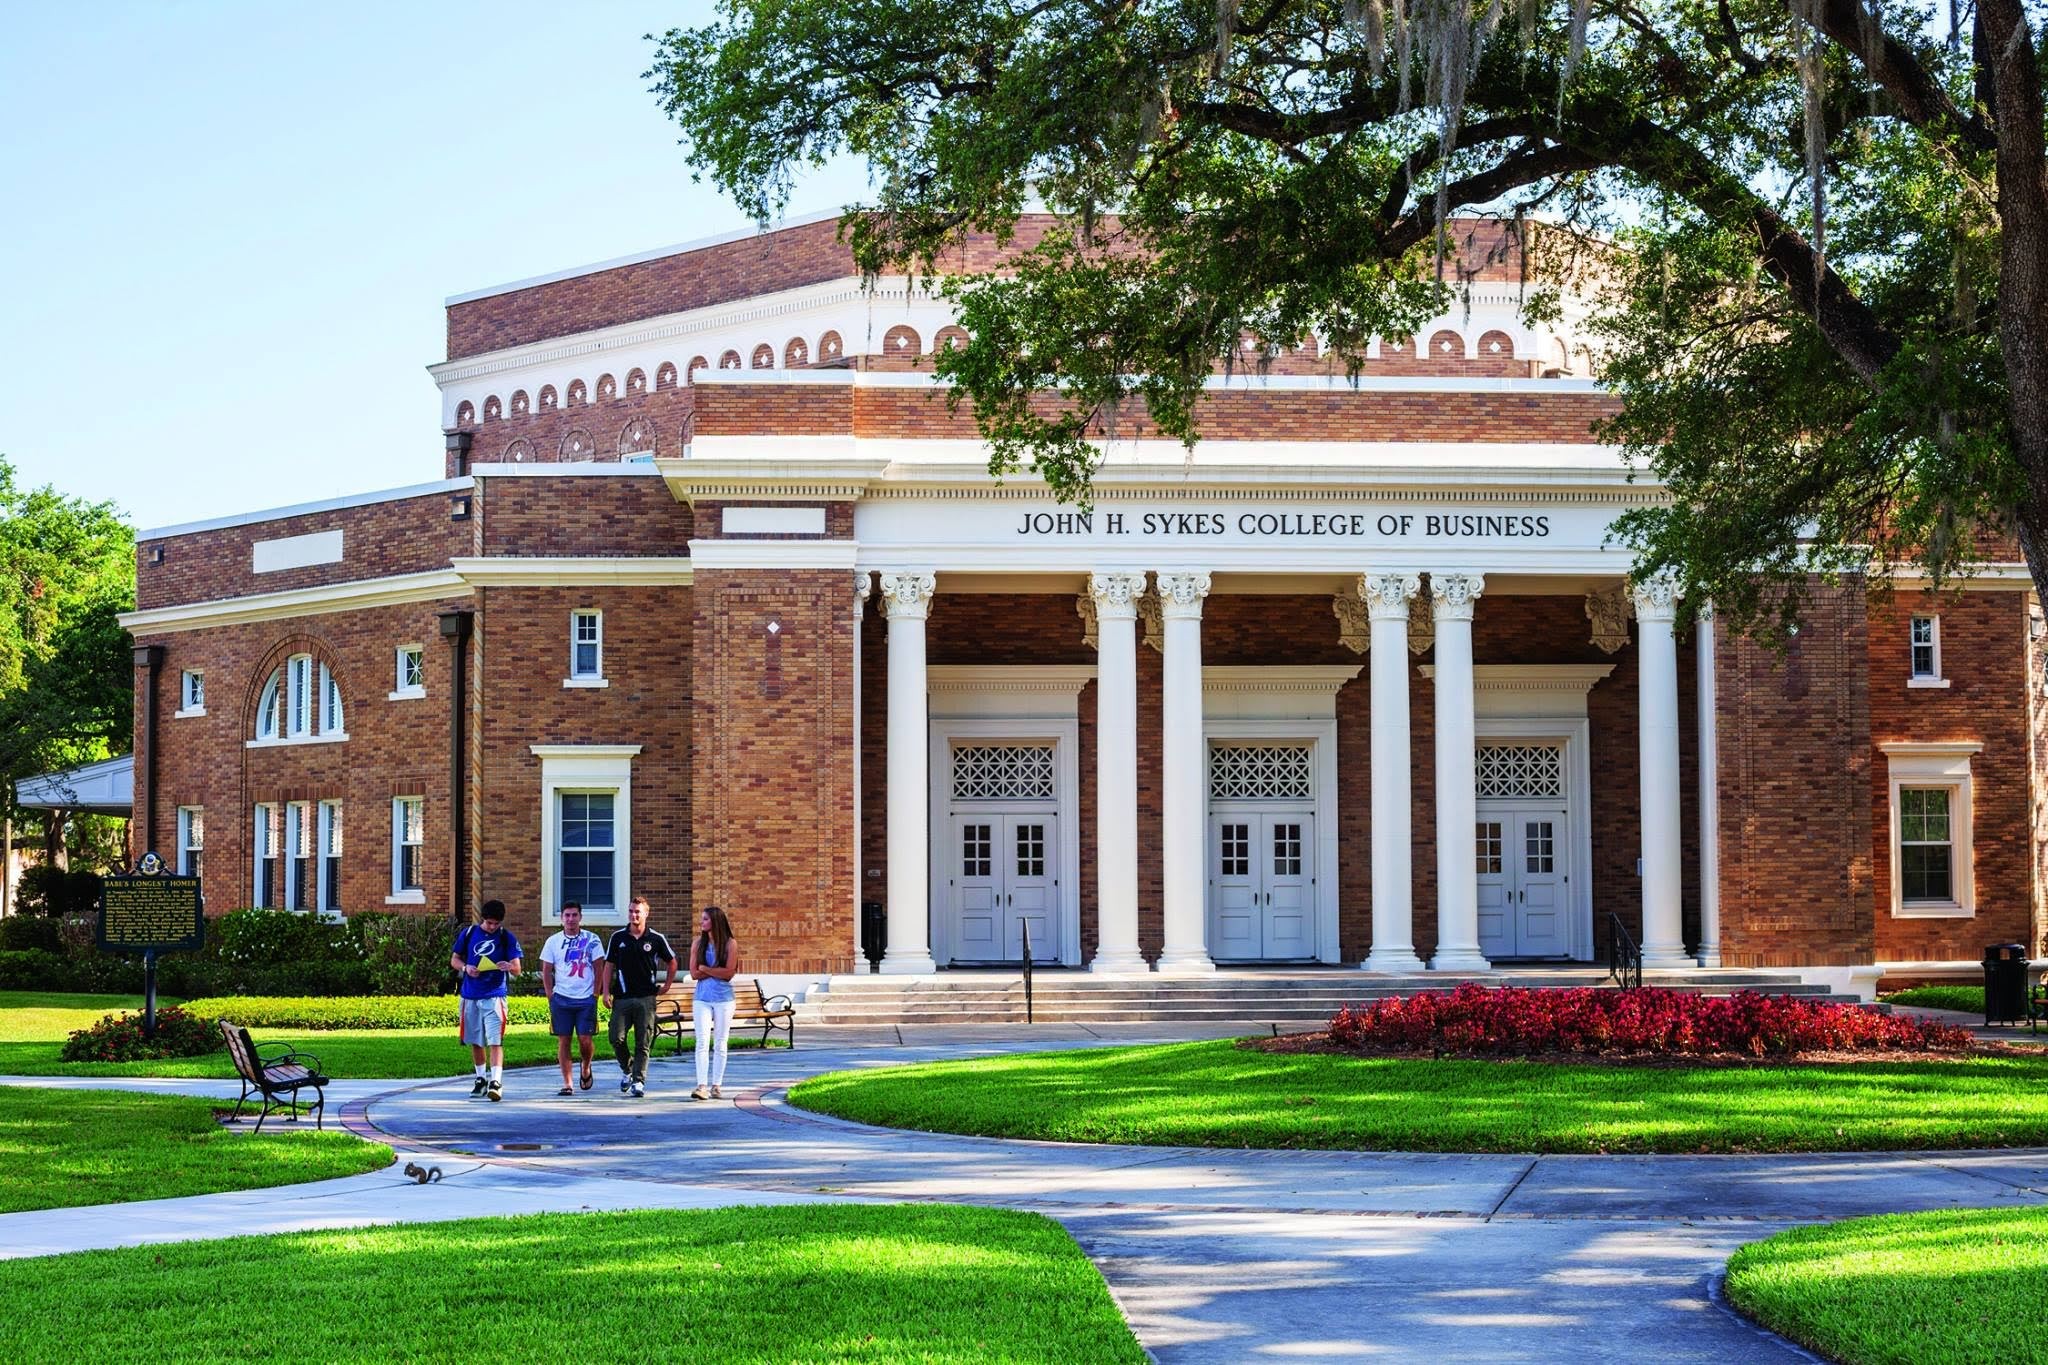 University of Tampa - Sykes College of Business